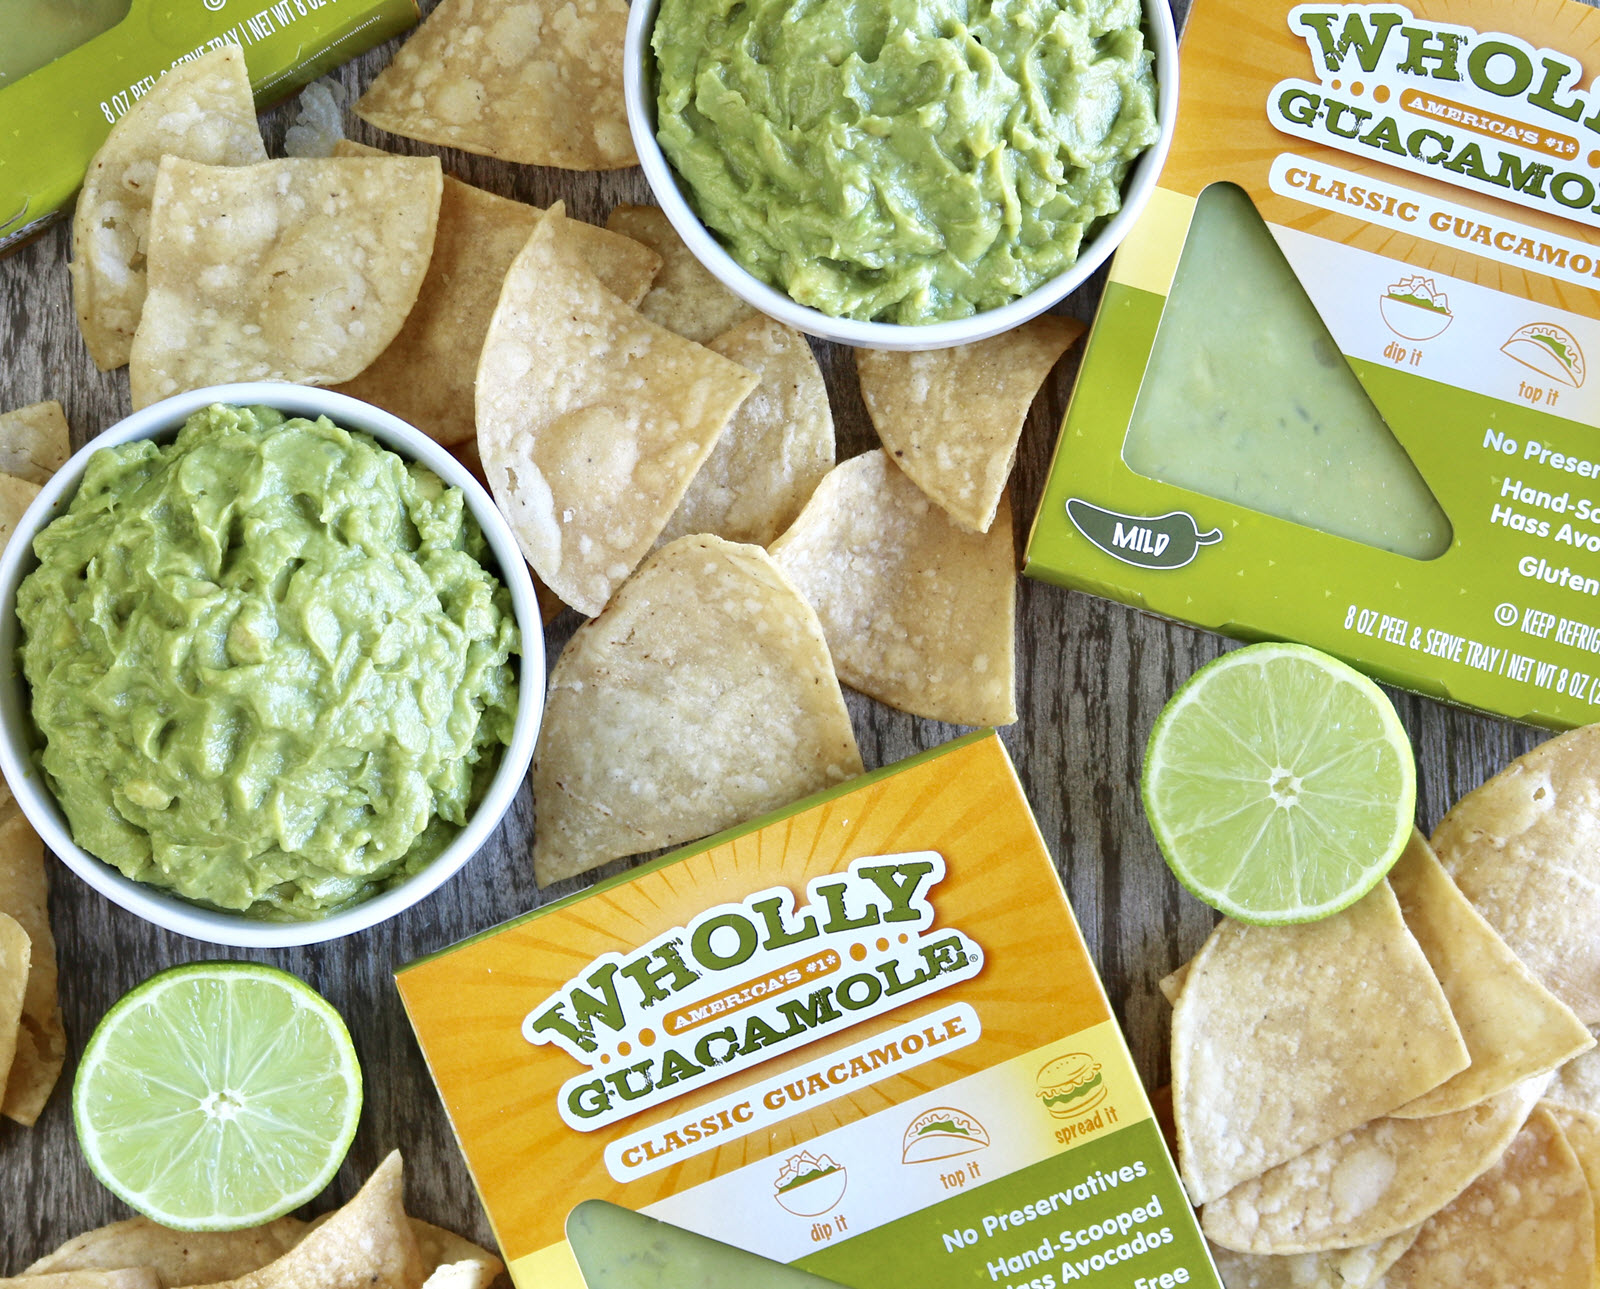 Megamex foods chips and wholly guacamole classic guac